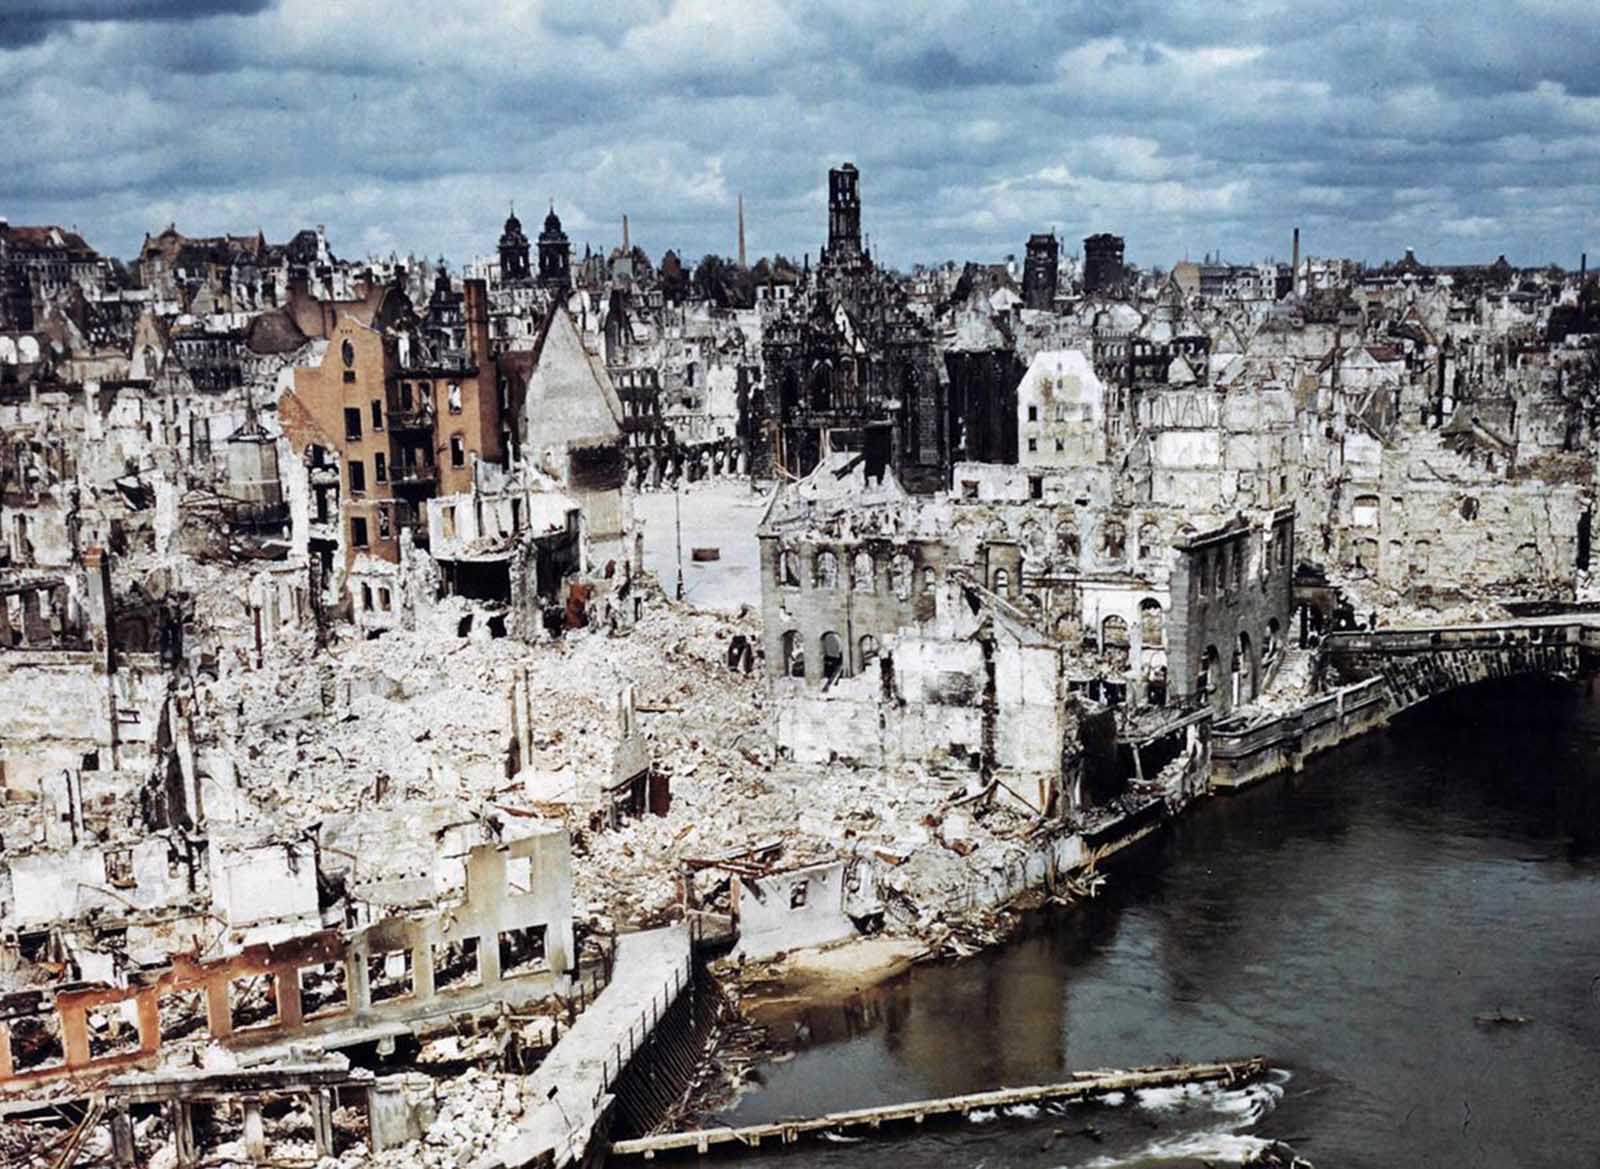 A color photograph of the bombed-out historic city of Nuremberg, Germany in June of 1945, after the end of World War II. Nuremberg had been the host of huge Nazi Party conventions from 1927 to 1938. The last scheduled rally in 1939 was canceled at the last minute due to a scheduling conflict: the German invasion of Poland one day prior to the rally date. The city was also the birthplace of the Nuremberg Laws, a set of draconian antisemitic laws adopted by Nazi Germany. Allied bombings from 1943 until 1945 destroyed more than 90% of the city center, and killed more than 6,000 residents. Nuremberg would soon become famous one last time as the host of the Nuremberg Trials -- a series of military tribunals set up to prosecute the surviving leaders of Nazi Germany. The war crimes these men were charged with included 